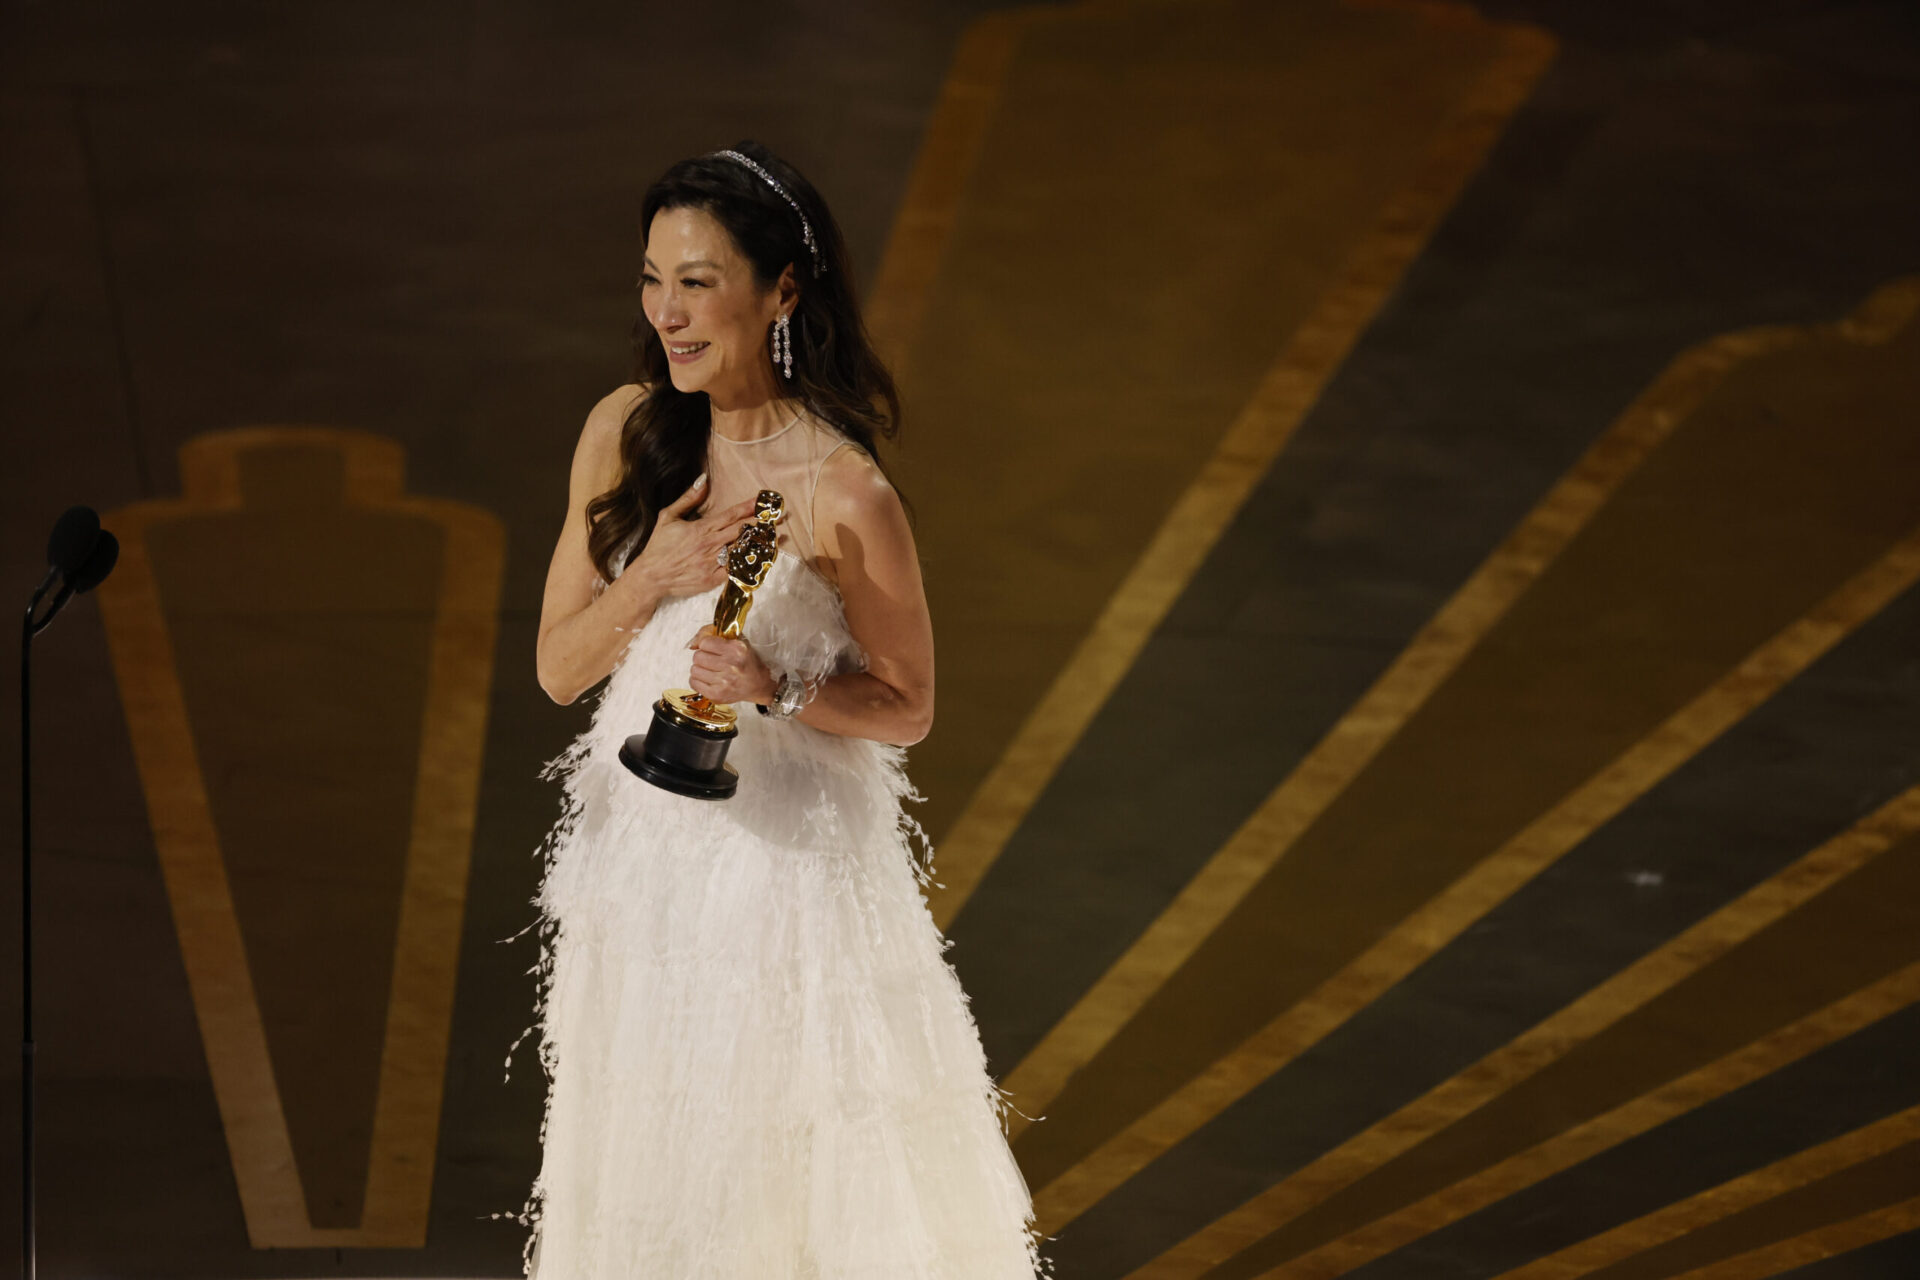 On March 12, Michelle Yeoh made history at the 95th Academy Awards by becoming the first Asian actress to win the Best Actress Oscar.